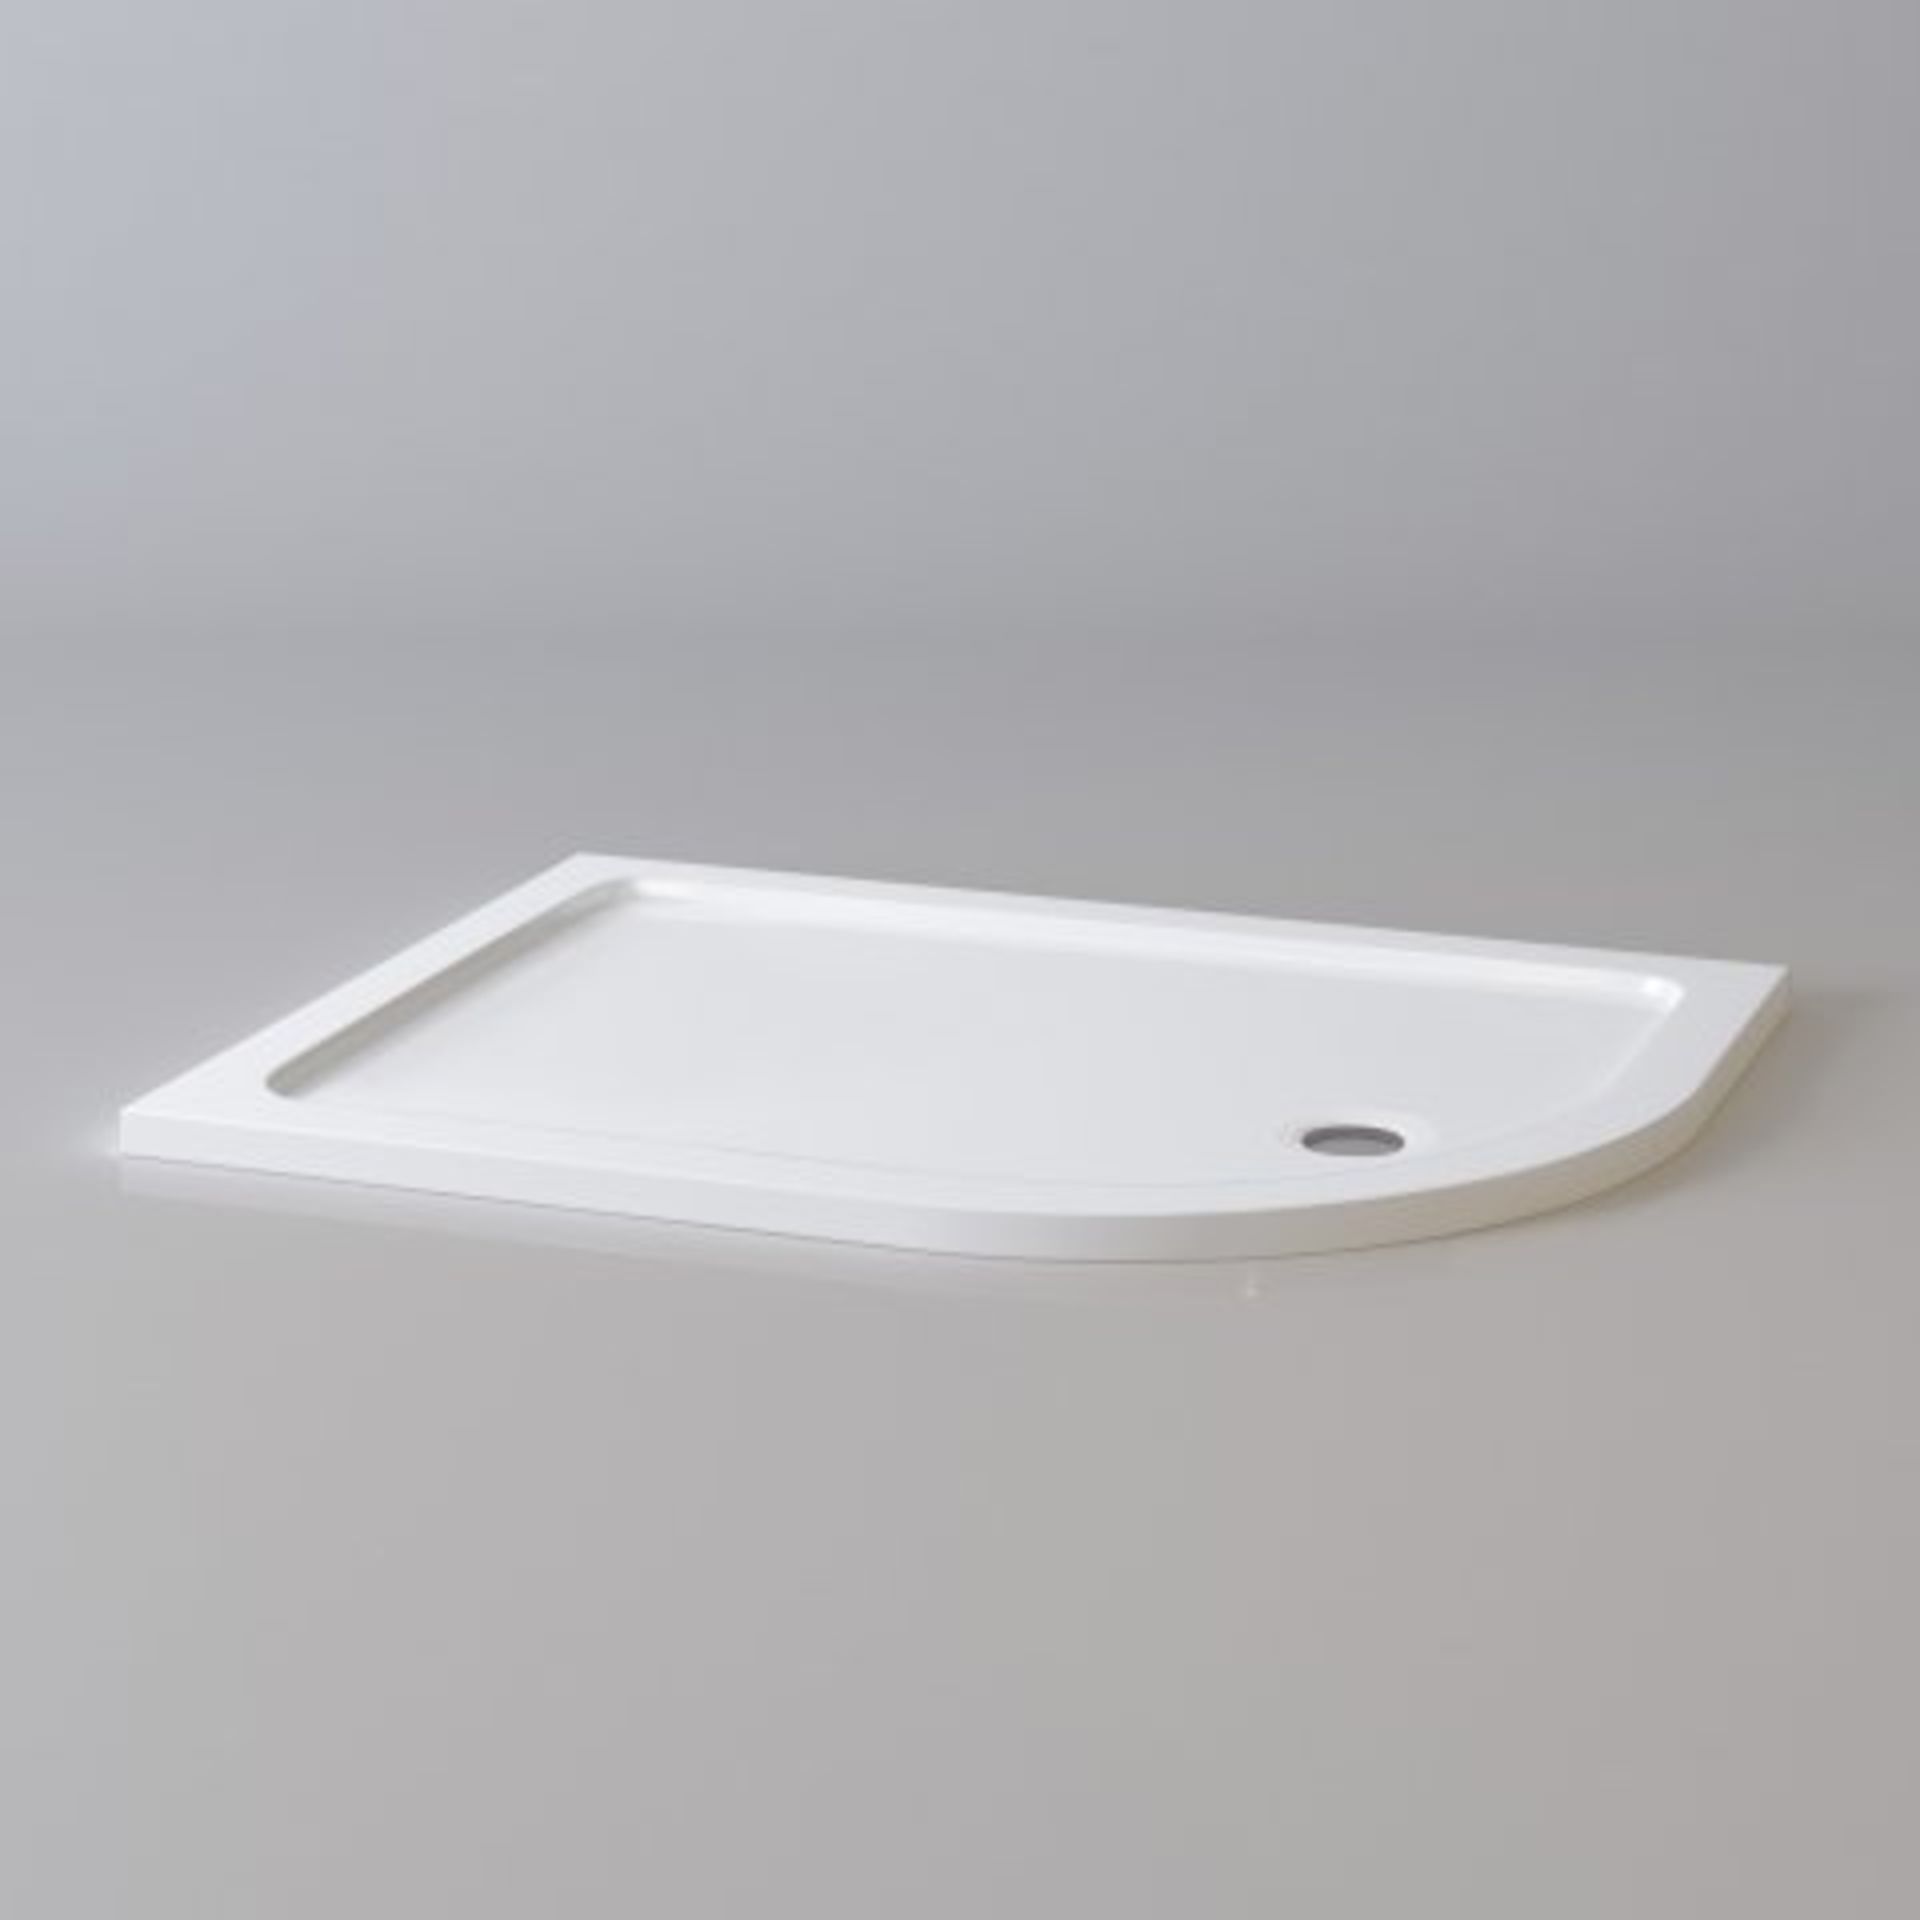 (T50) 1200x900mm Offset Quadrant Ultraslim Stone Shower Tray - Right. RRP £324.99. Magnificently